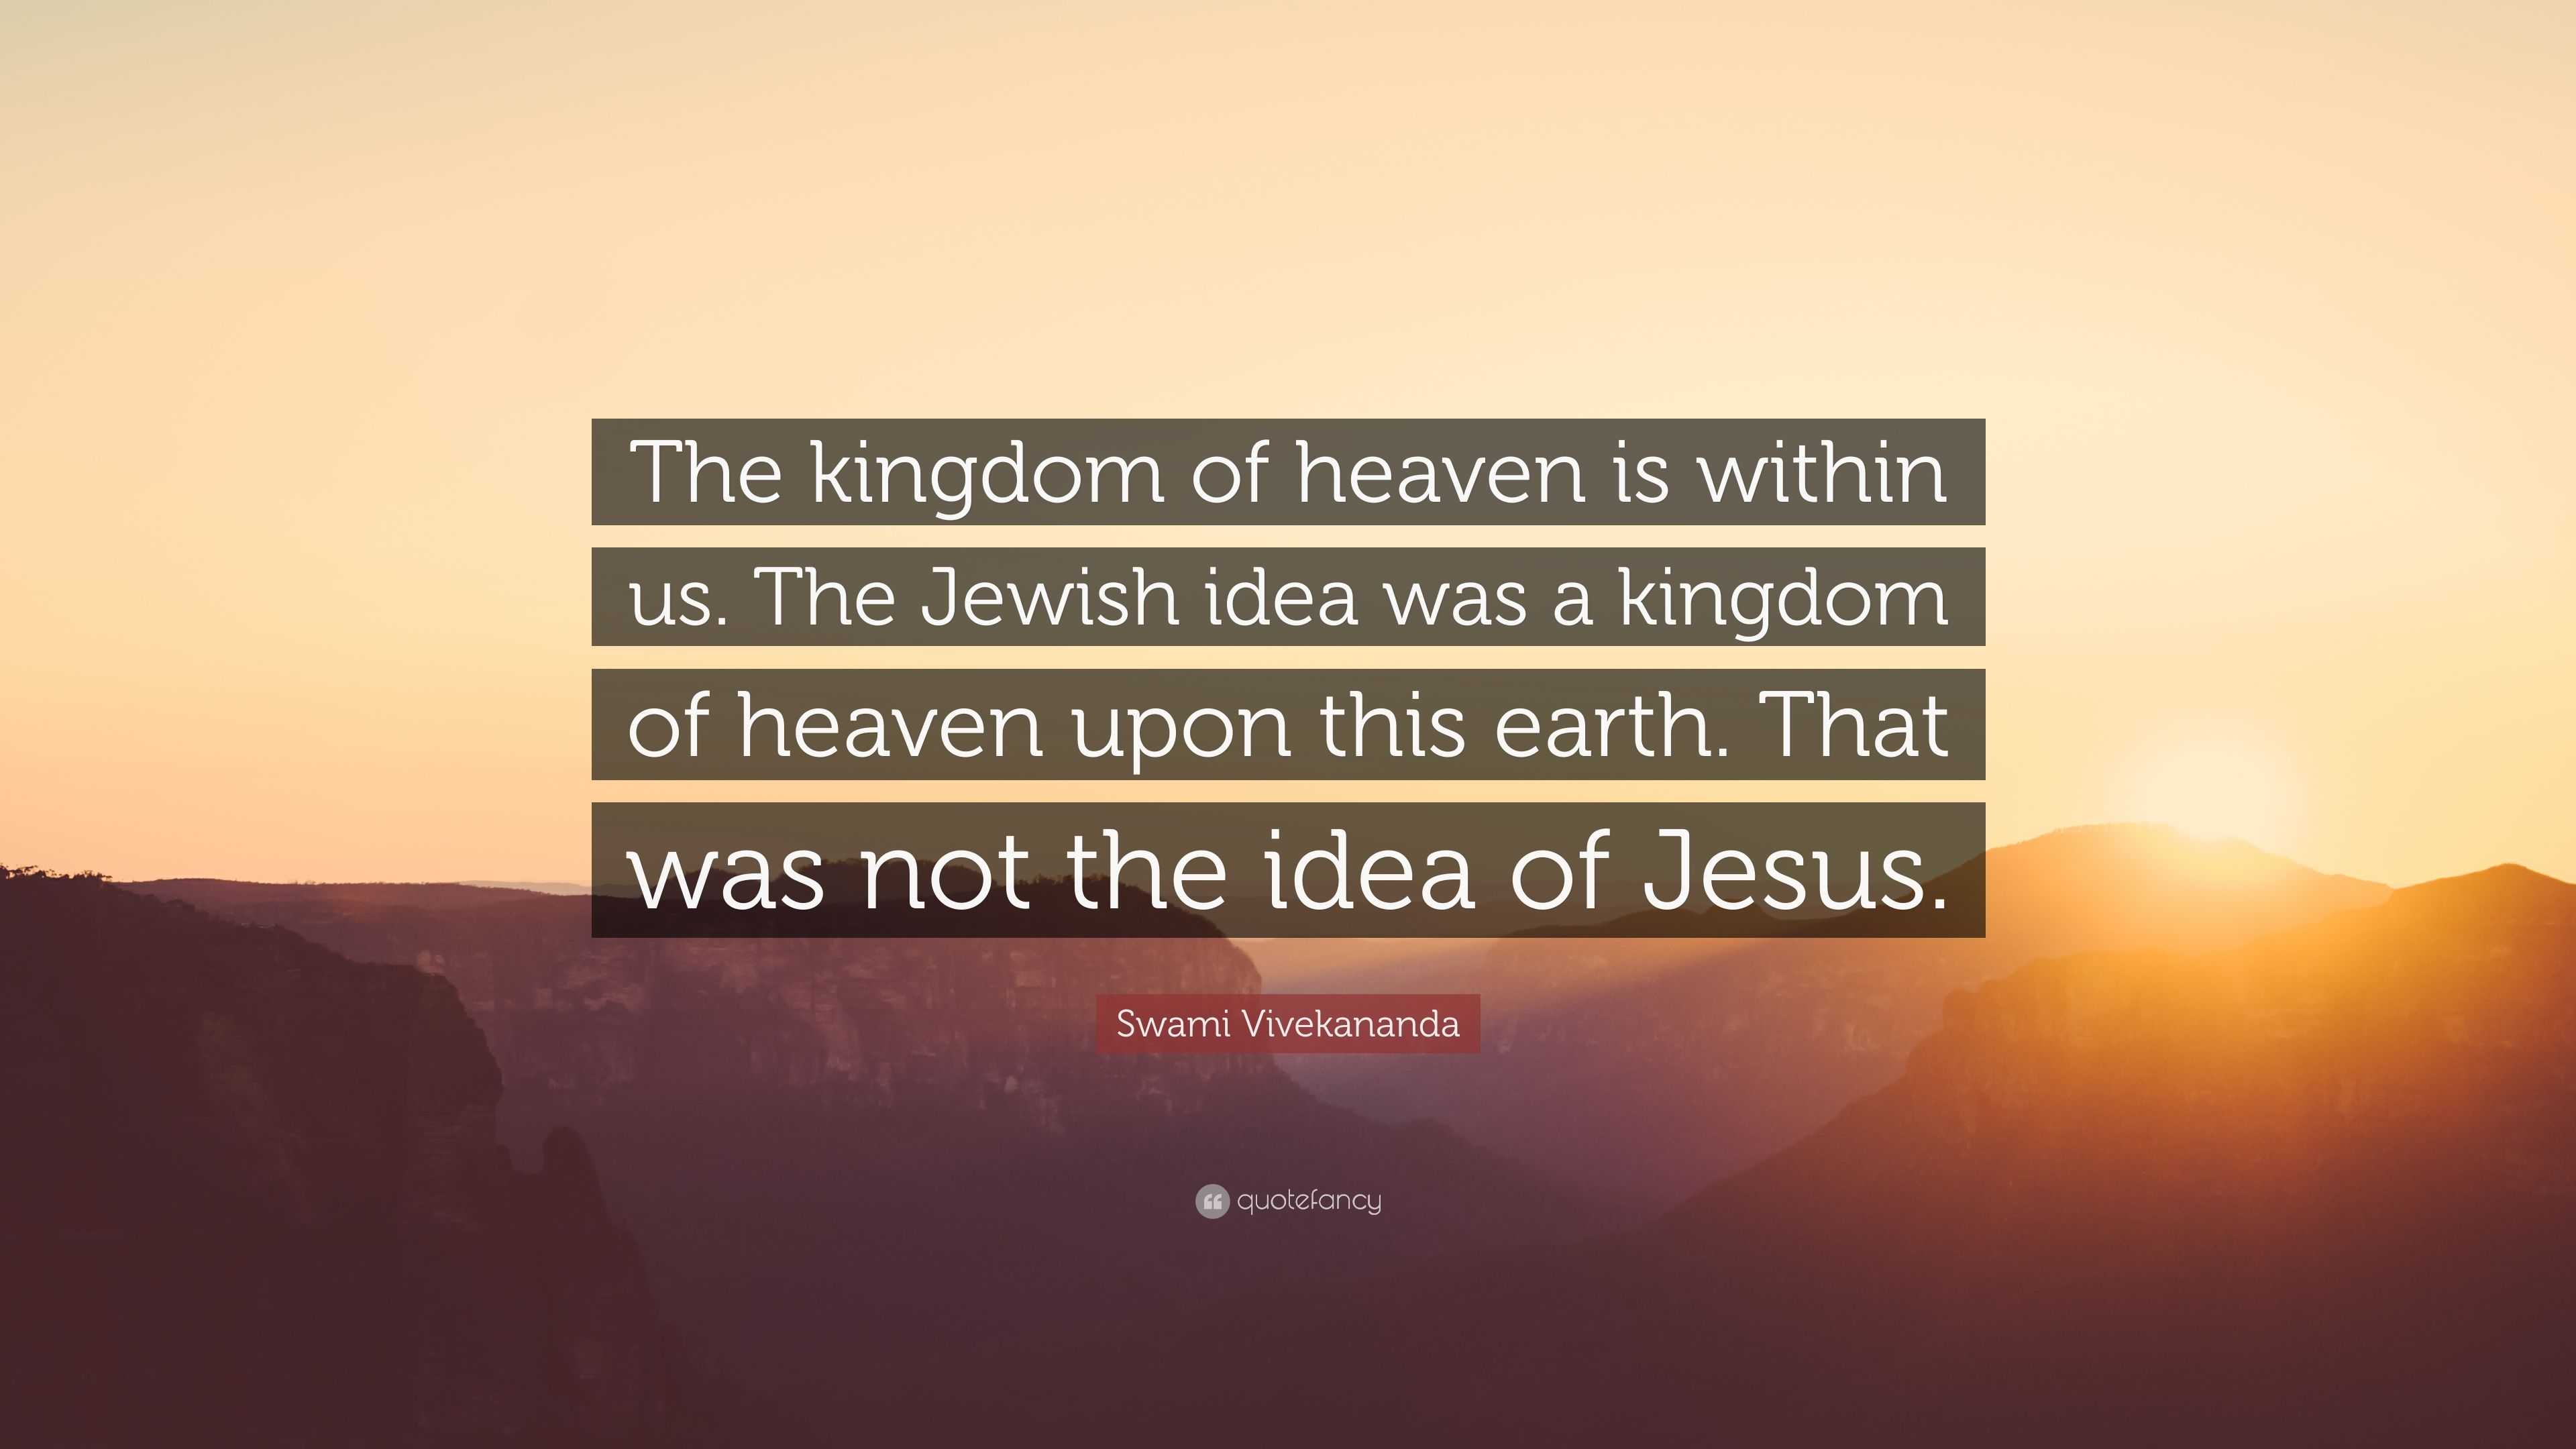 How Can I Find the Kingdom of Heaven on Earth? 